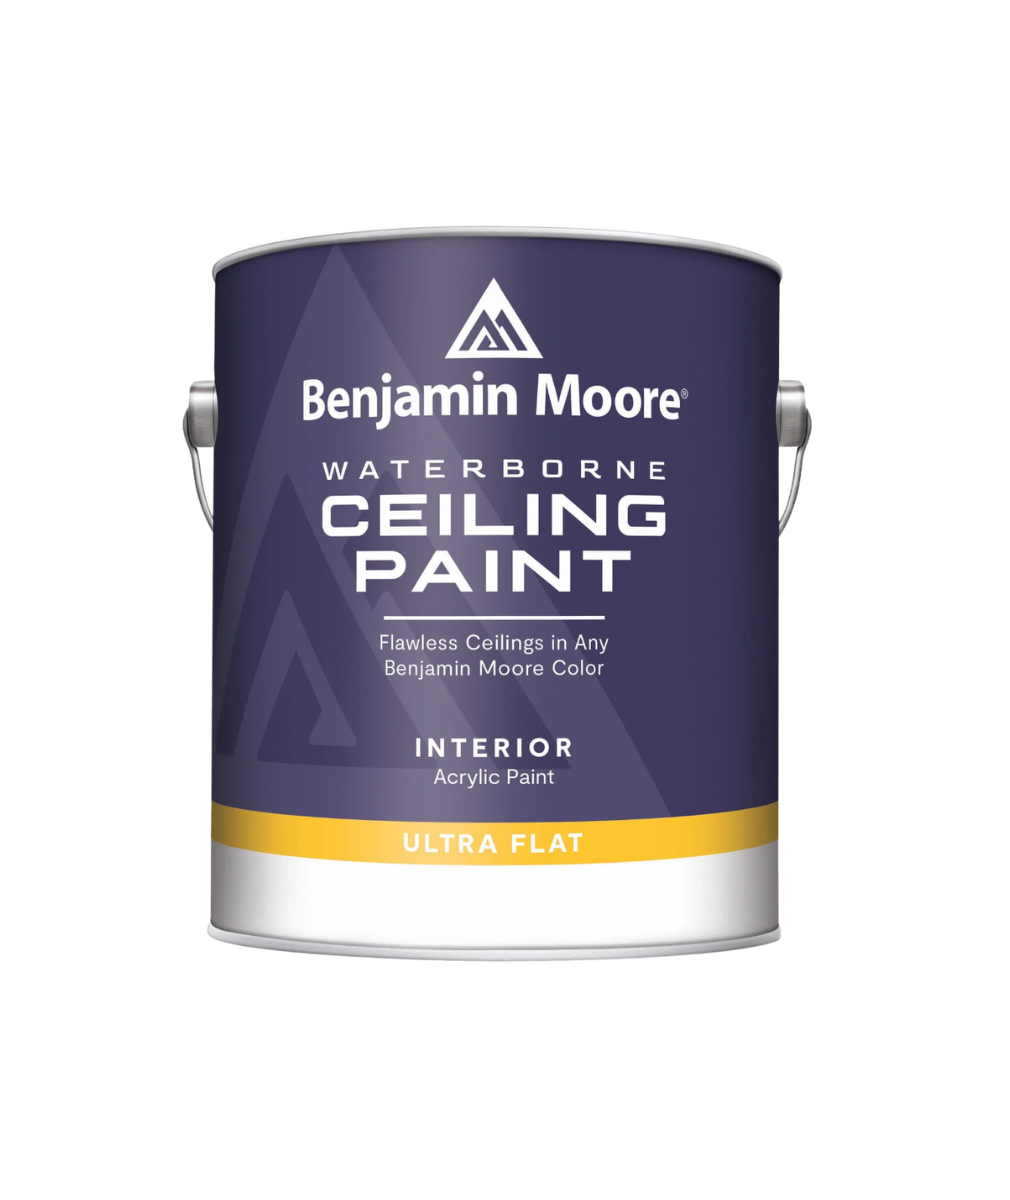 Benjamin Moore Waterborne Ceiling Paint available at Wallauer Paint & Design.